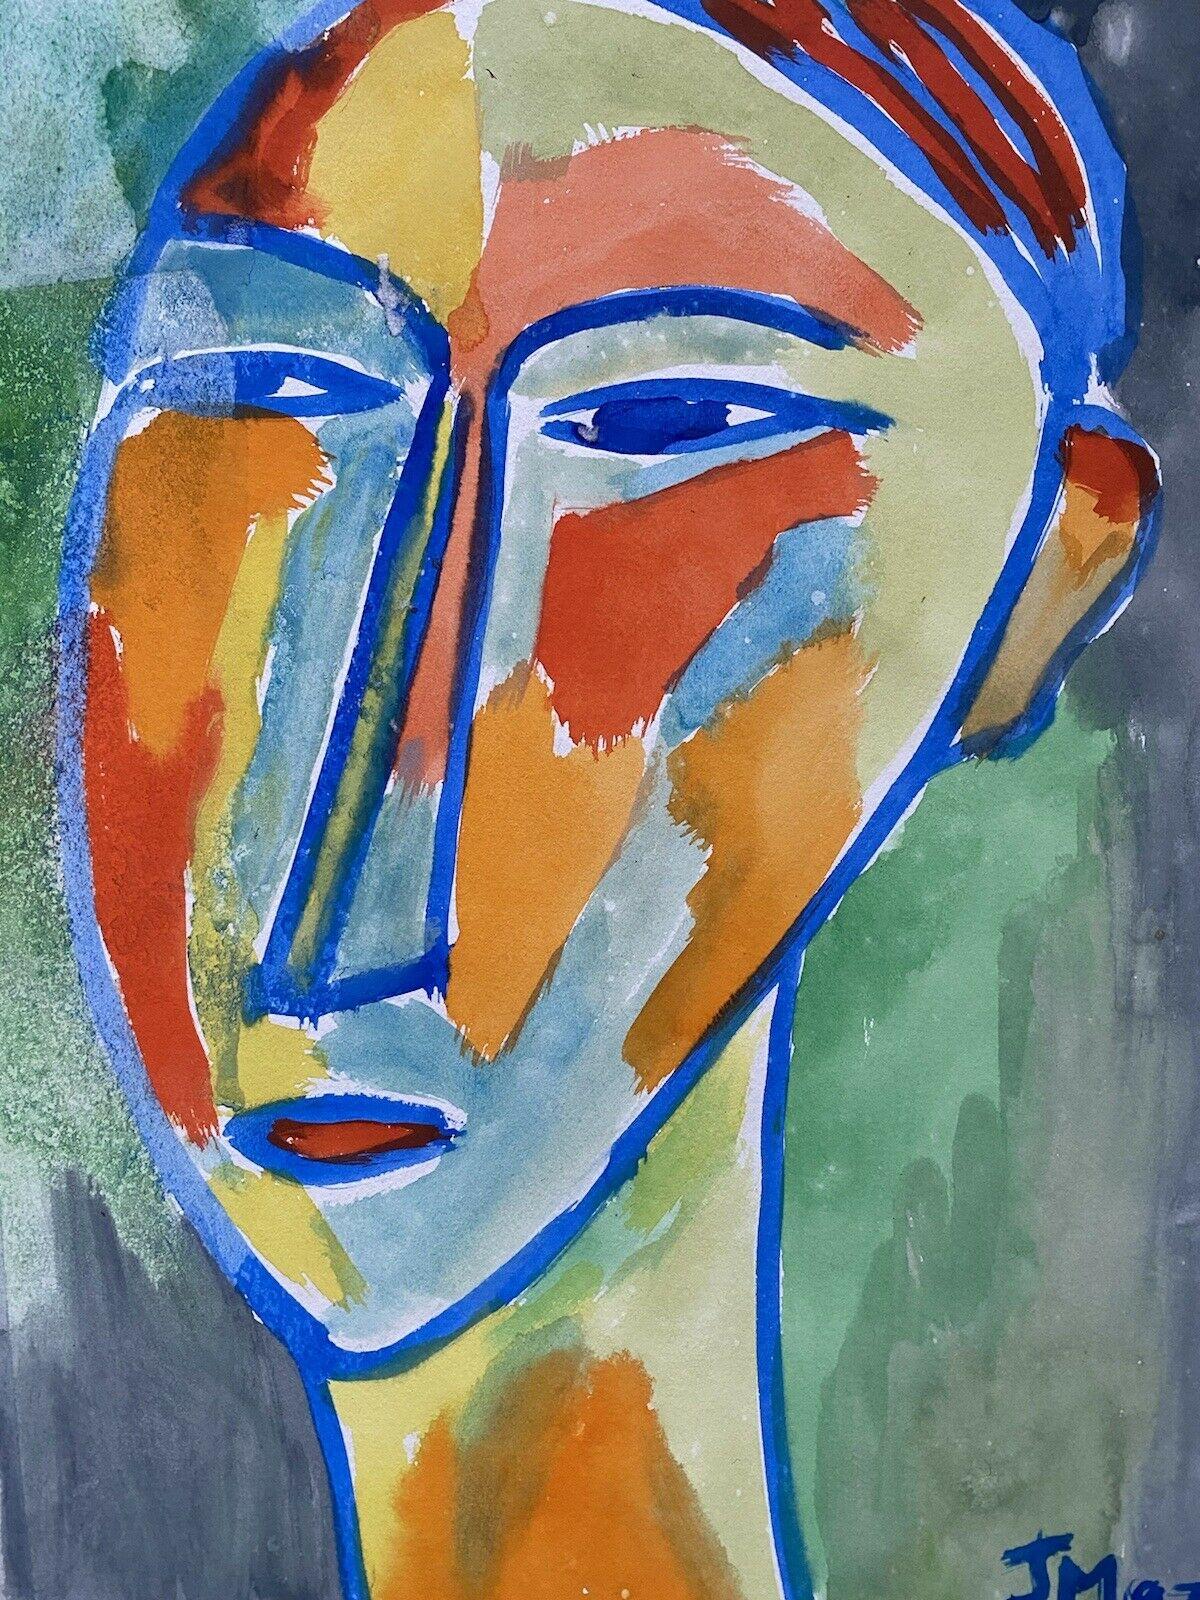 JEAN MARC (1949-2019) 20th CENTURY FRENCH MODERNIST PAINTING - PORTRAIT OF FACE - Painting by Jean Marc